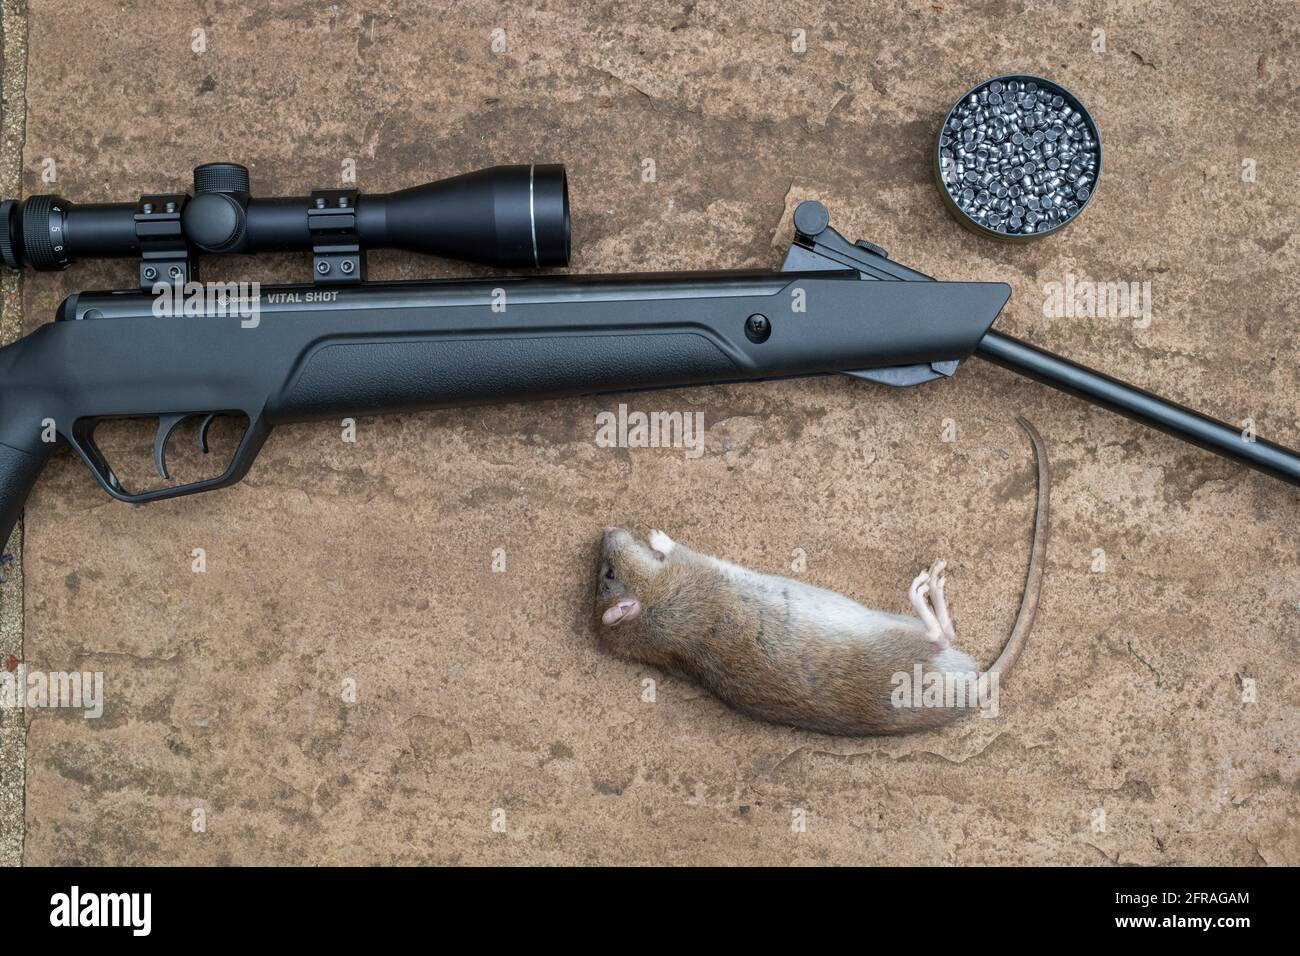 Dead rat and air rifle Stock Photo